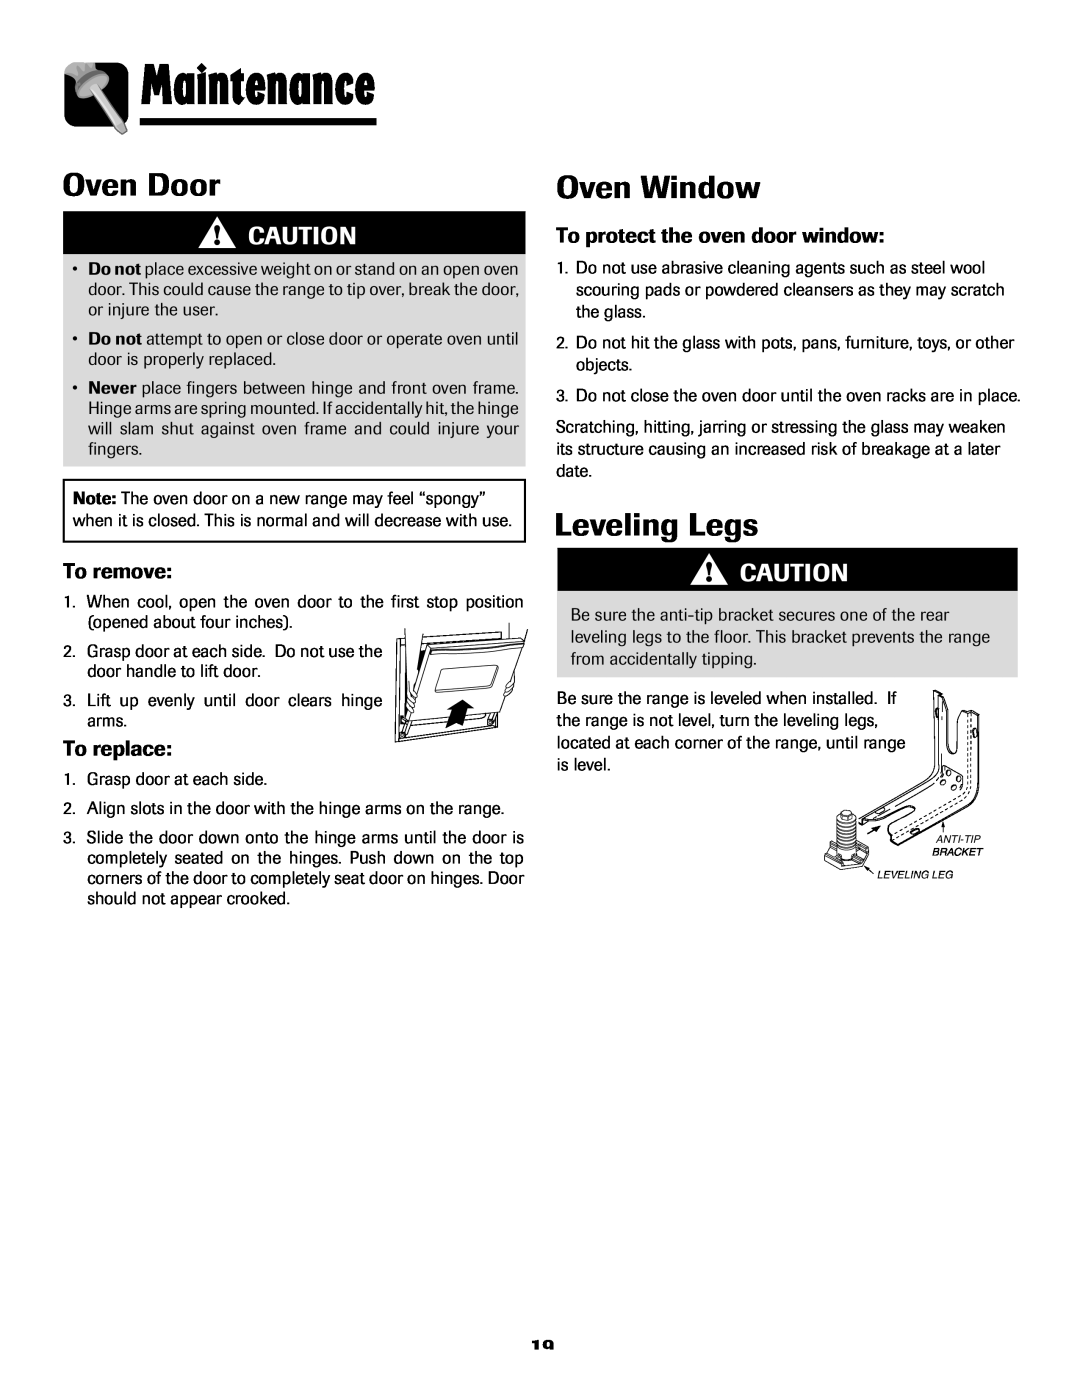 Maytag MES5752BAS manual Maintenance, Oven Door, Oven Window, Leveling Legs, To protect the oven door window, To remove 